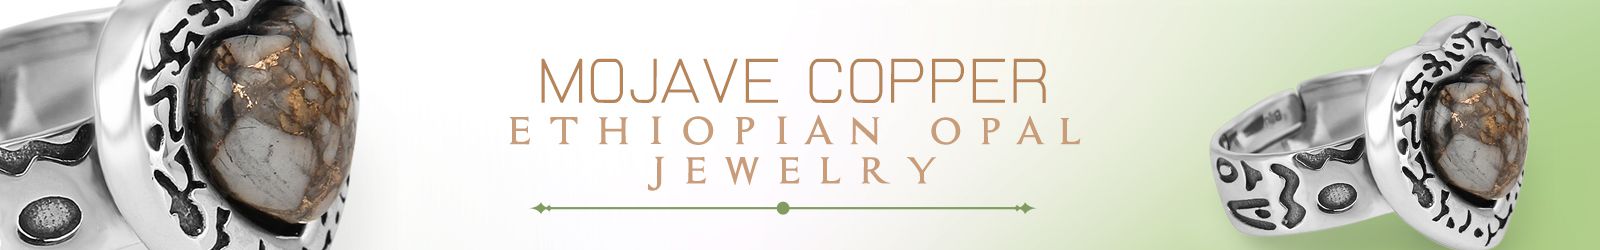 Wholesale mojave copper ethiopian opal jewelry manufacturer